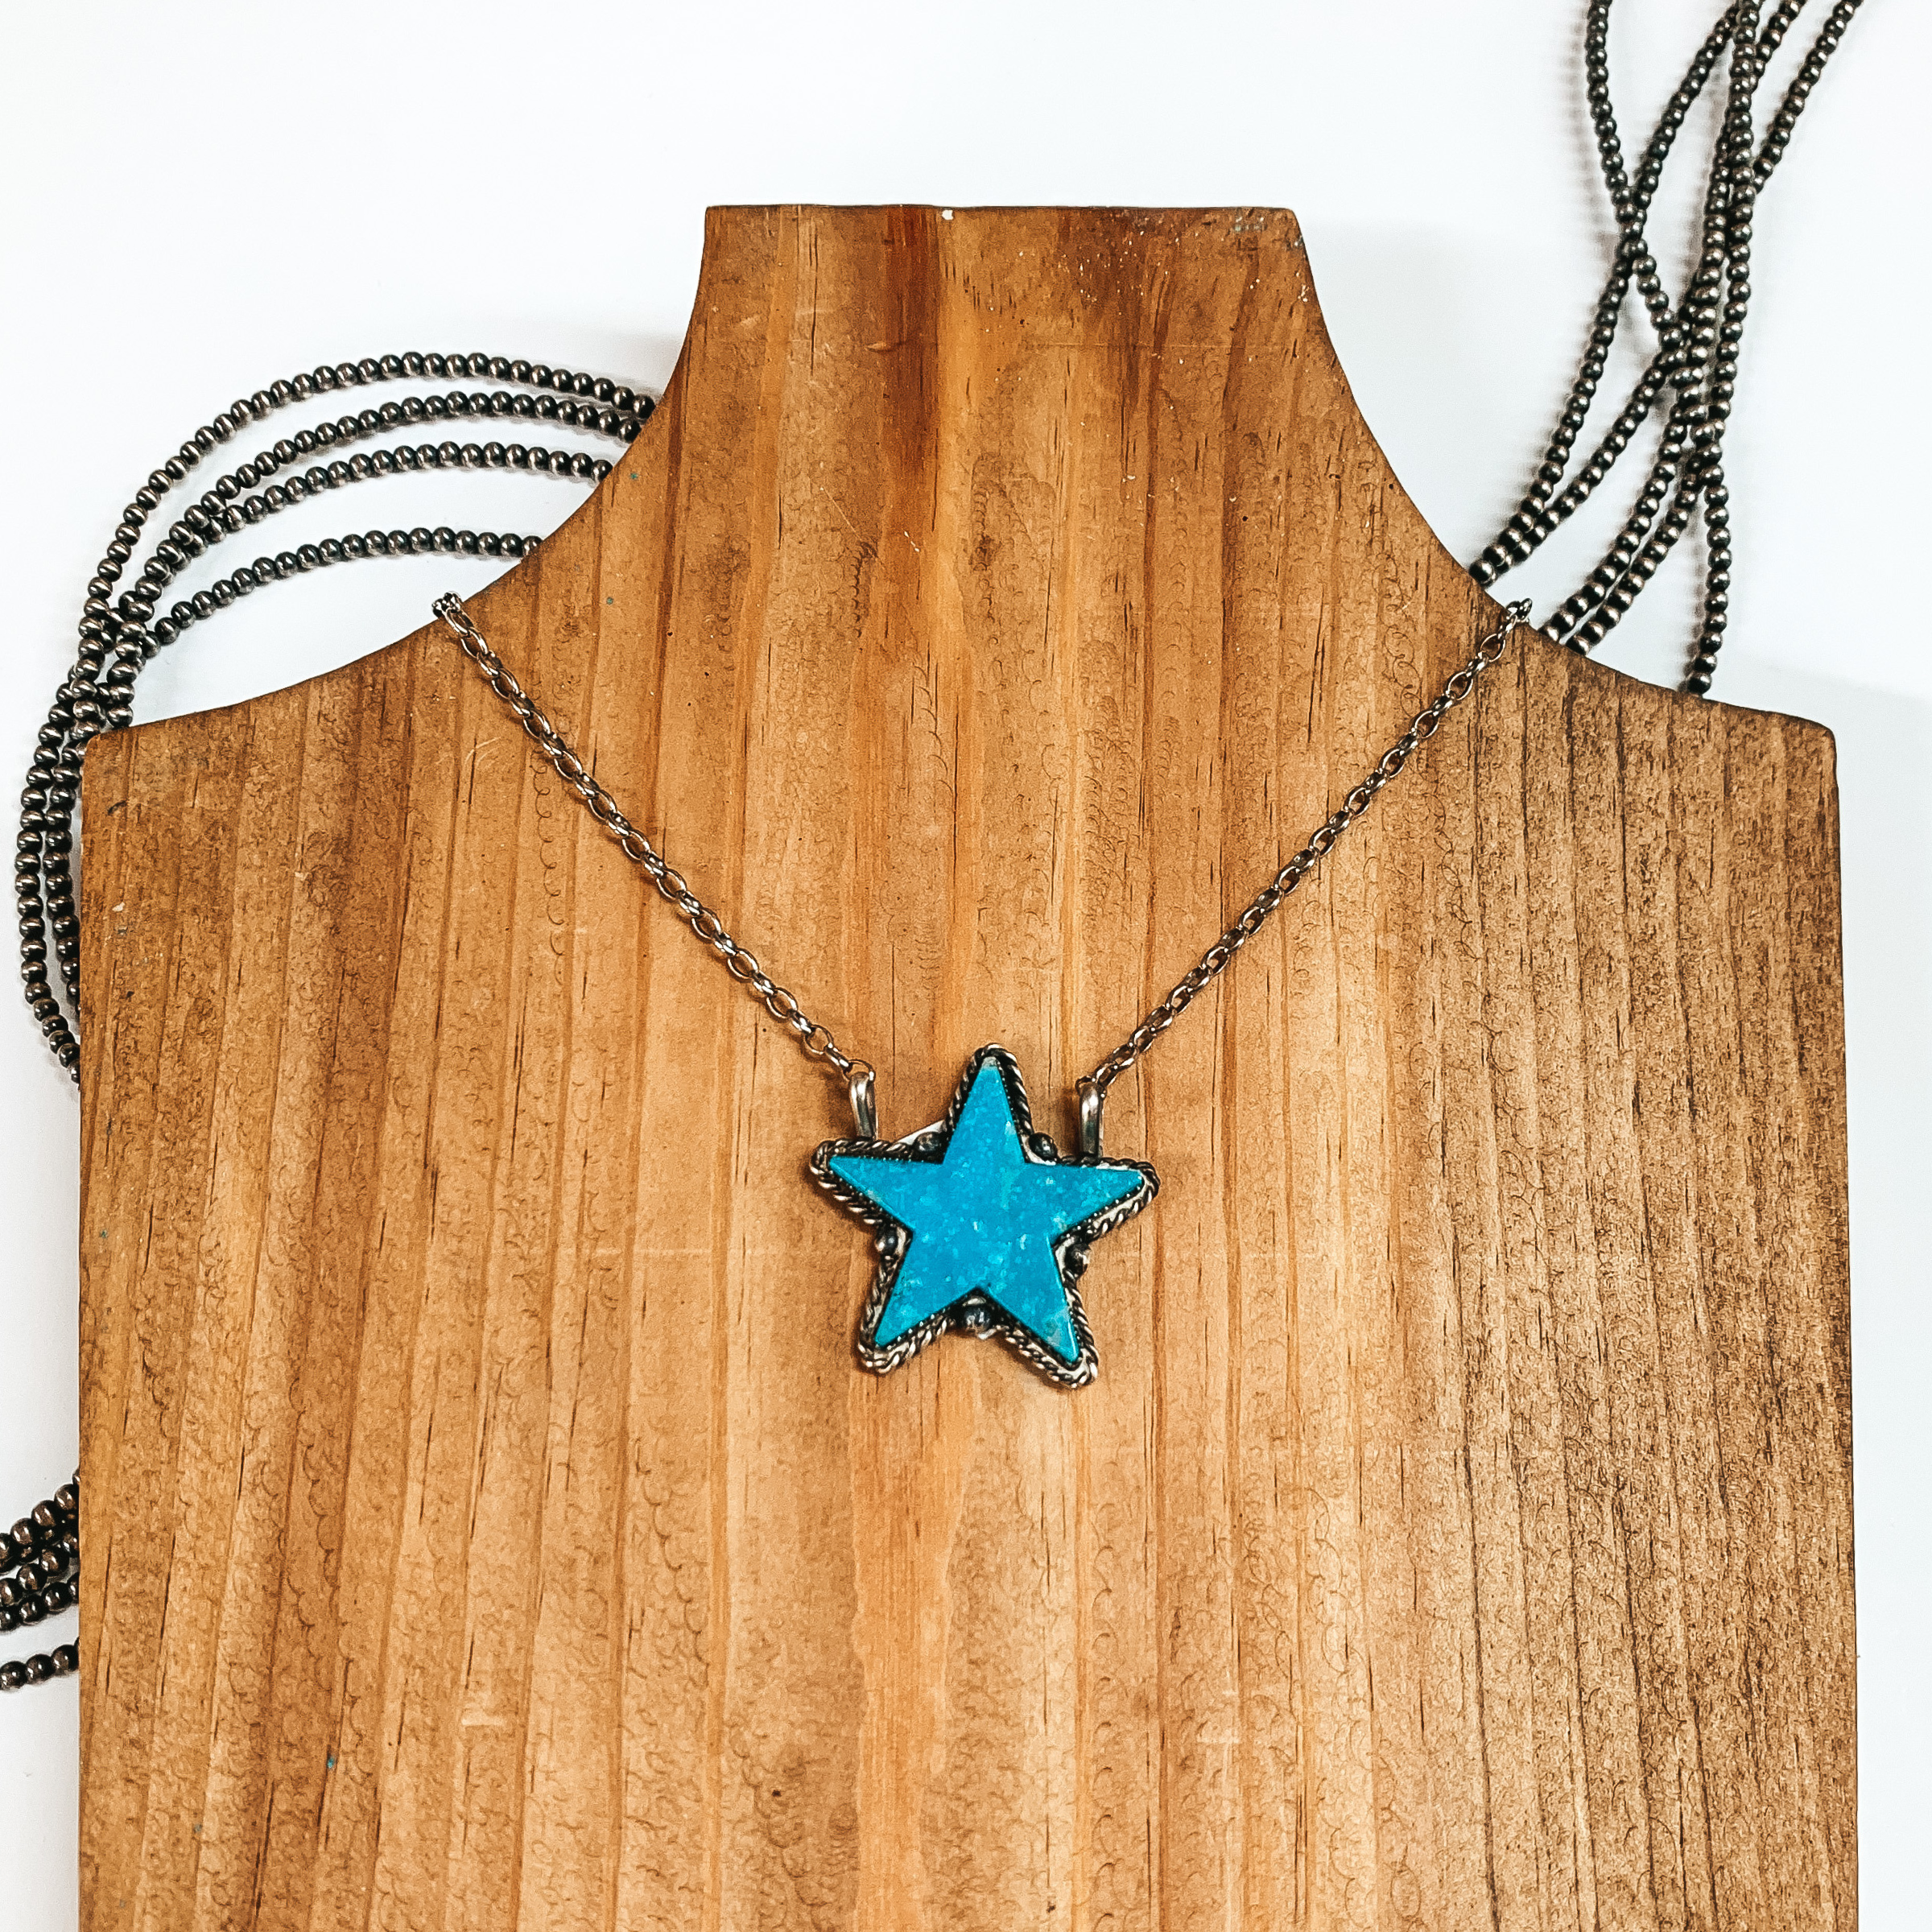 Silver chain necklace with turquoise star pendant. This necklace is pictured on a wood necklace holder on a white background. 